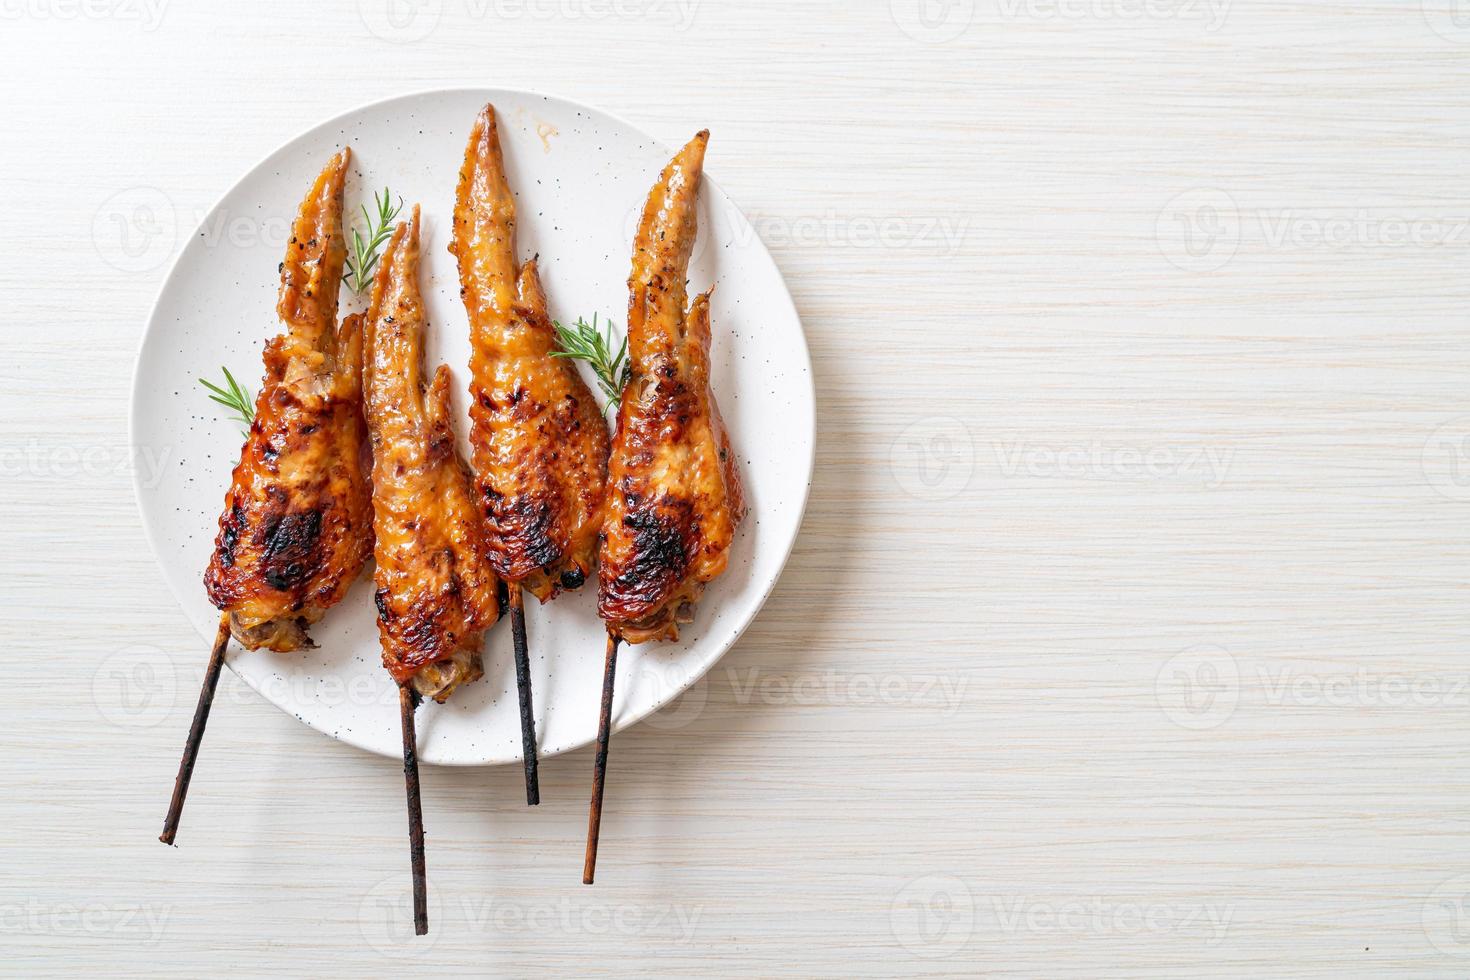 Grilled or barbecue chicken wings skewer on plate photo